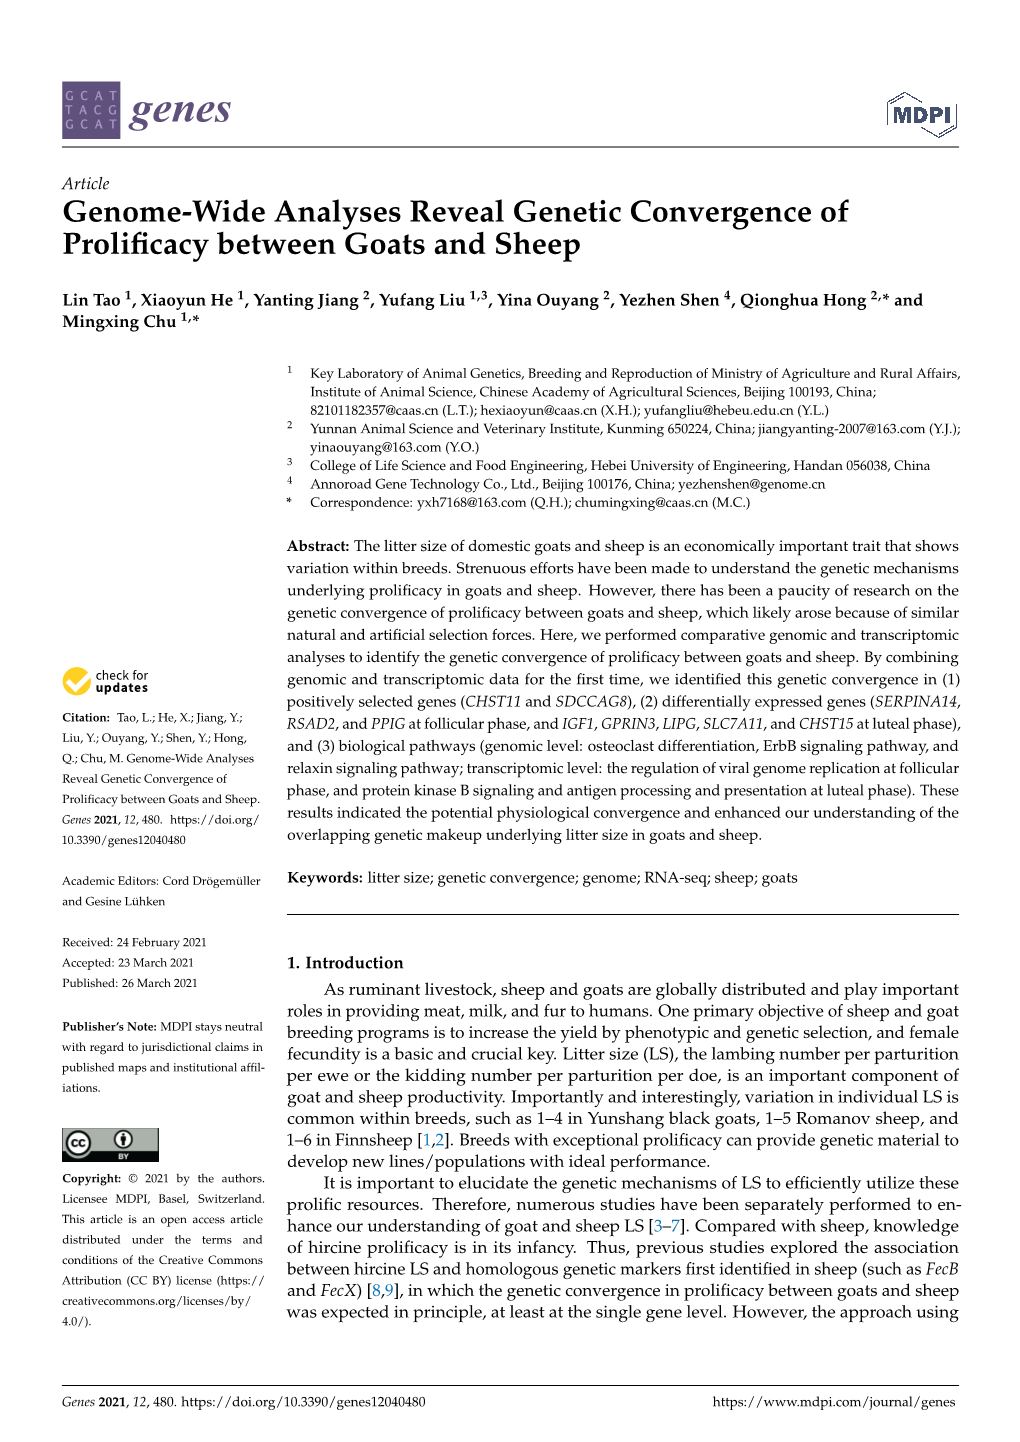 Genome-Wide Analyses Reveal Genetic Convergence of Prolificacy Between Goats and Sheep